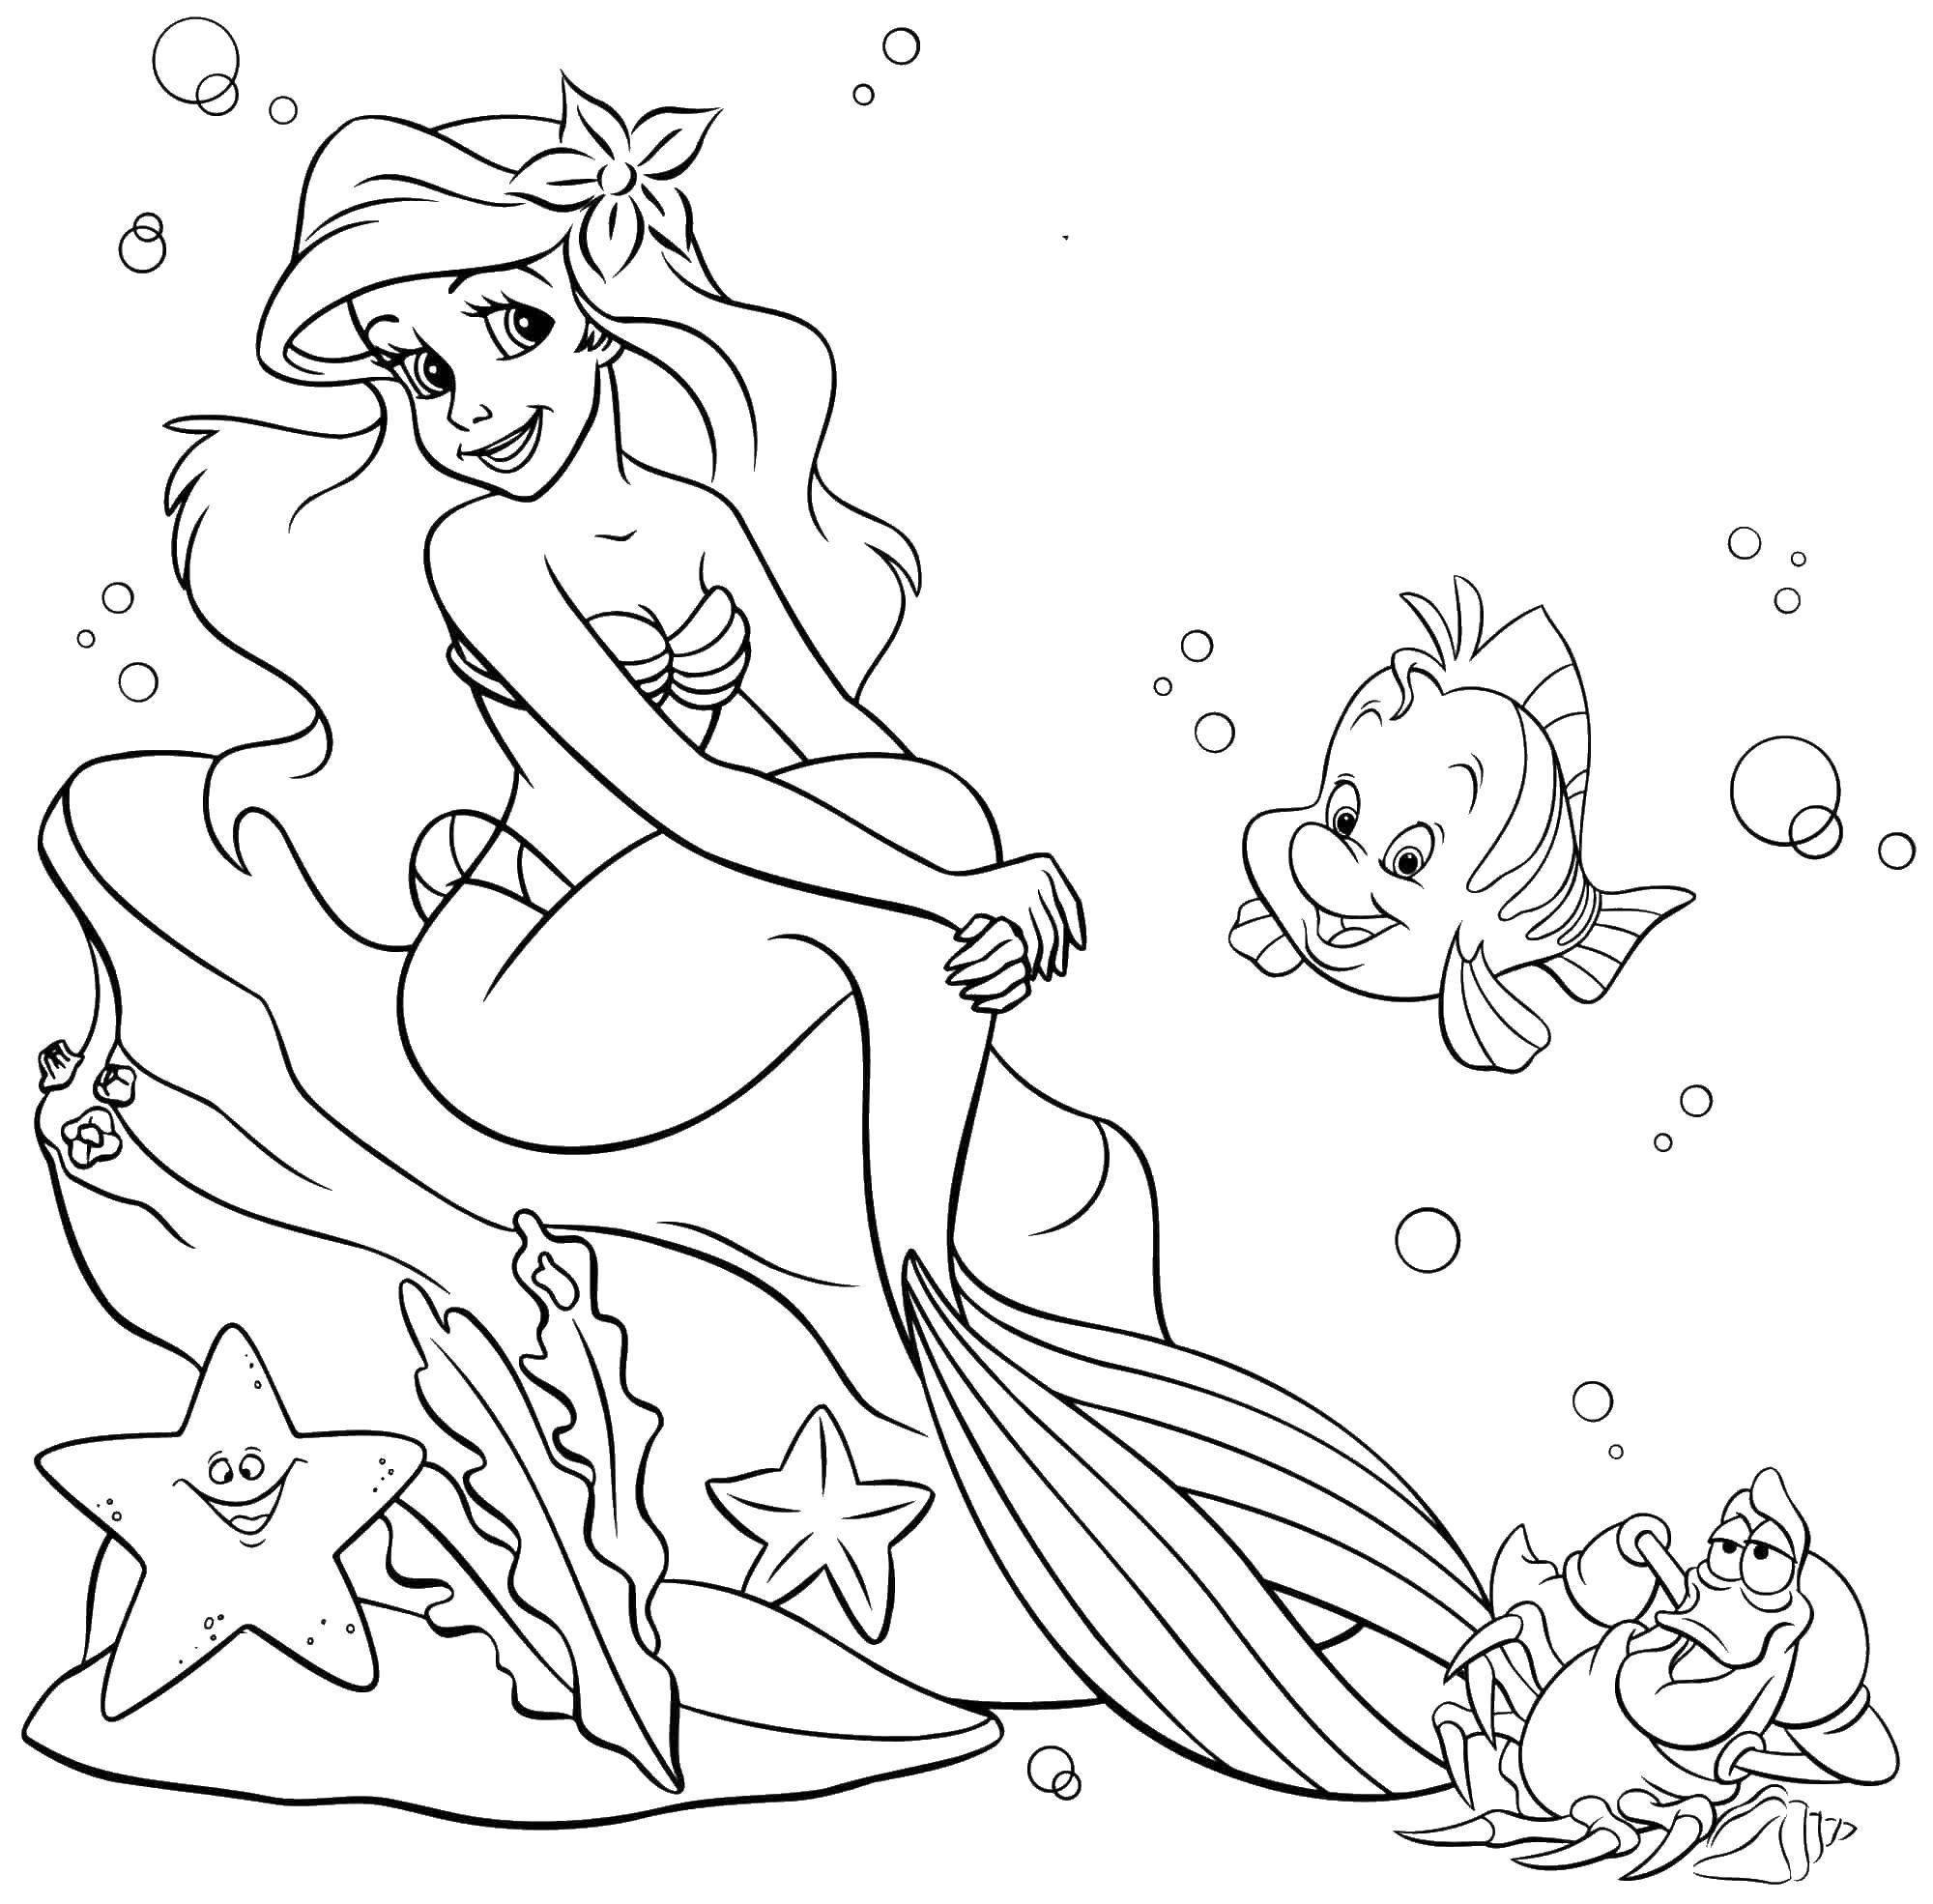 Coloring Flounder with Ariel. Category The little mermaid. Tags:  Disney, the little mermaid, Ariel.